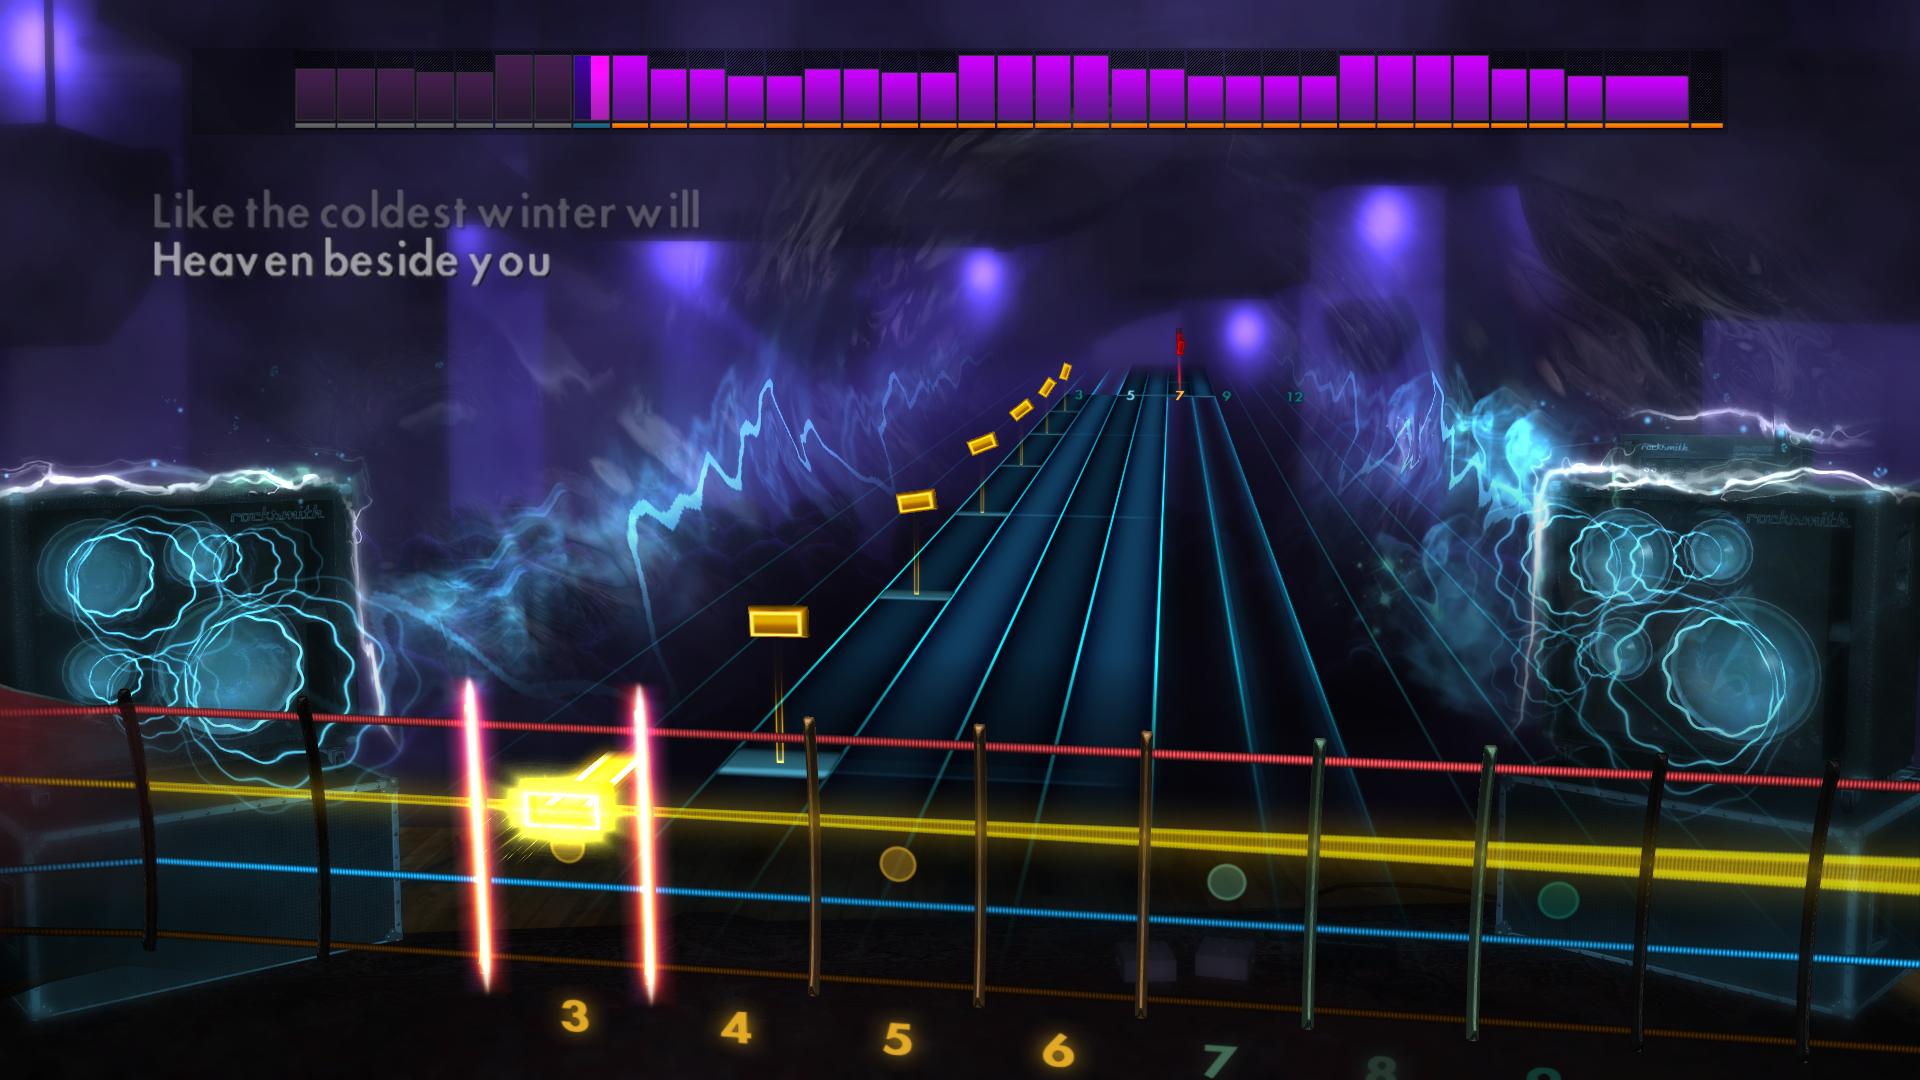 Rocksmith® 2014 Edition – Remastered – Alice in Chains - “Heaven Beside You” Featured Screenshot #1